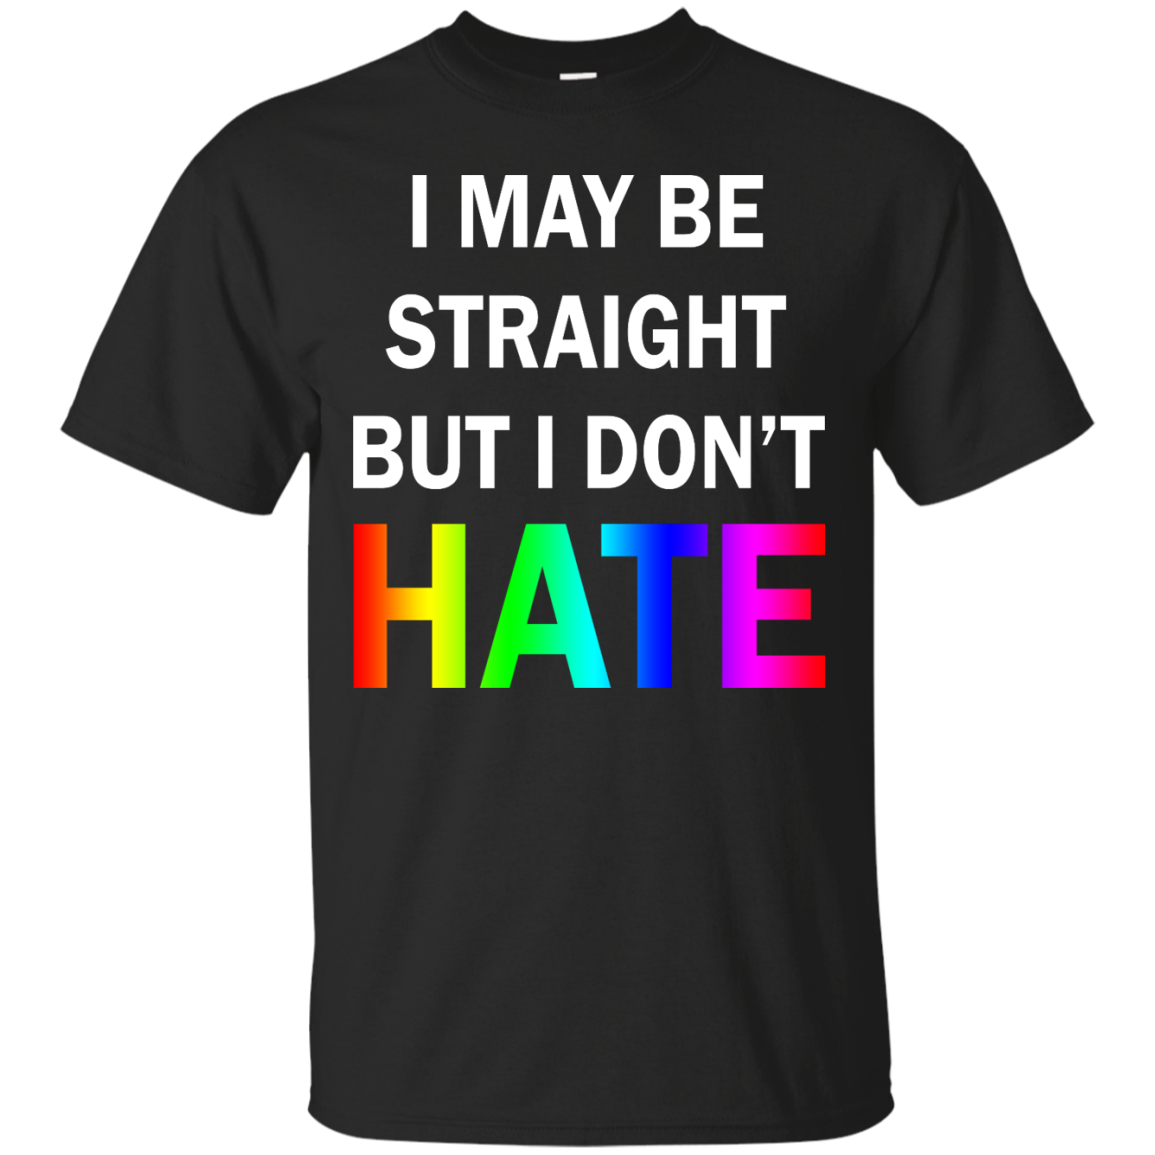 I May Be Straight But I Don't Hate shirt